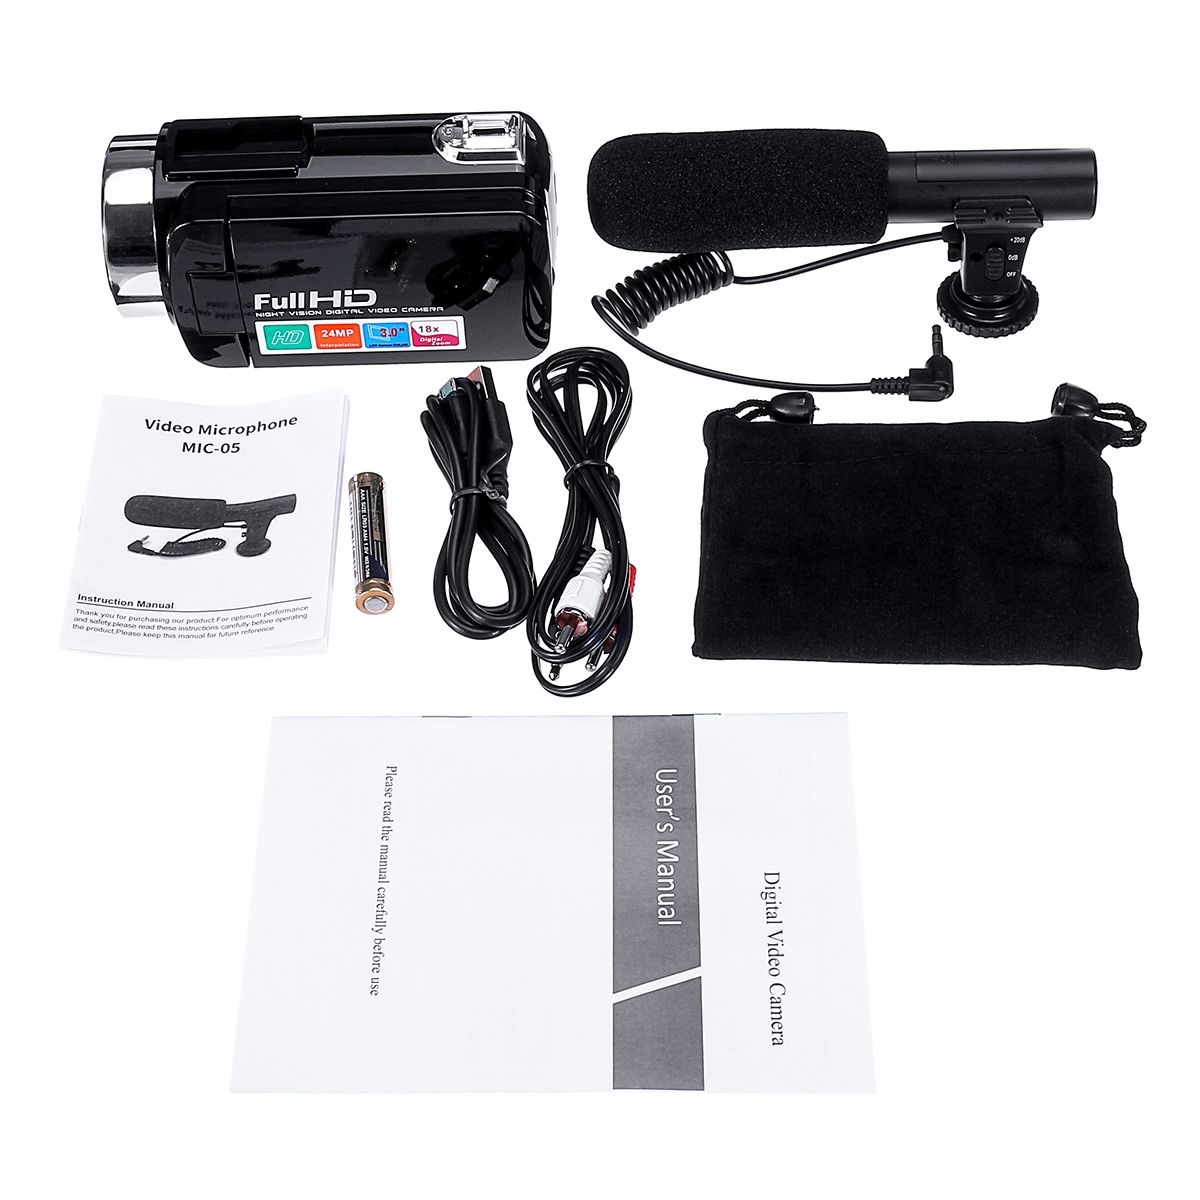 4K-HD-1080P-24MP-18X-Zoom-3-Inch-LCD-Digital-Camcorder-Video-DV-Camera-With-Mic-1627251